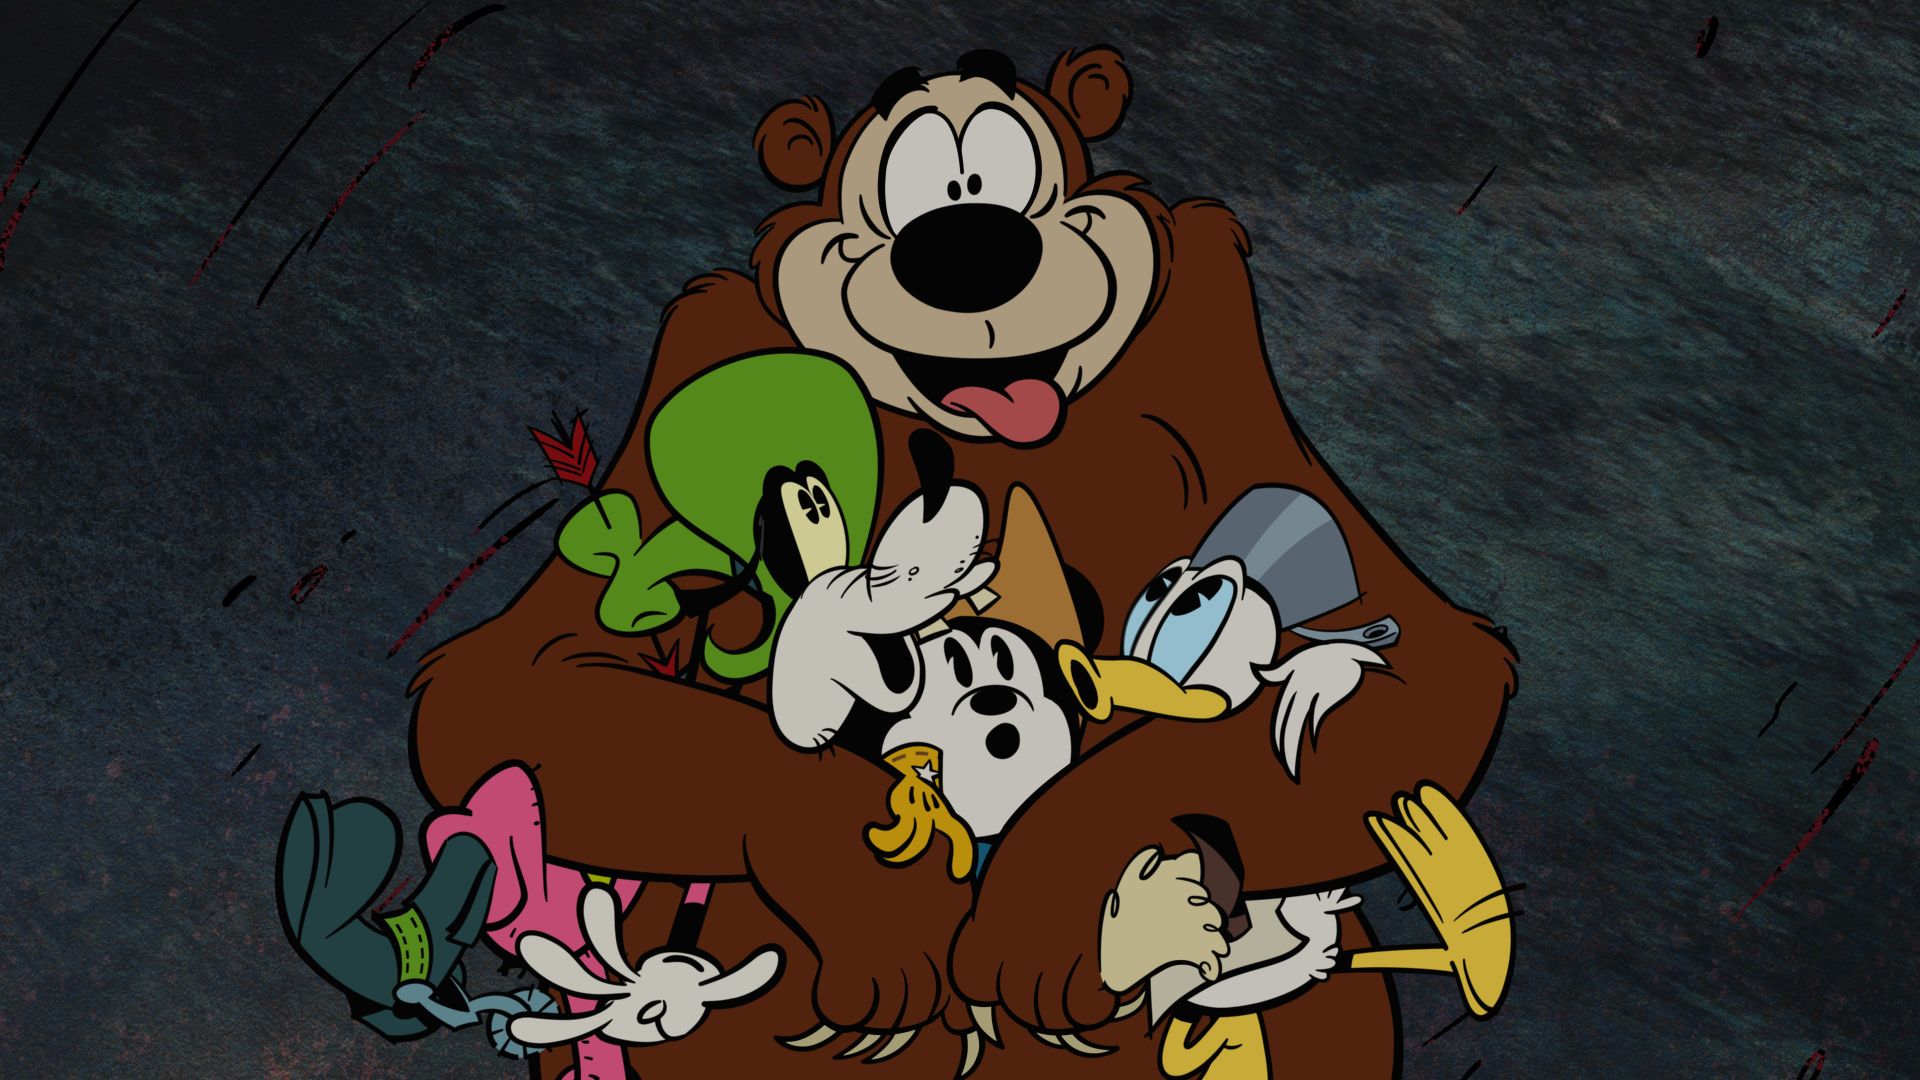 Humphrey The Bear in The Wonderful World of Mickey Mouse